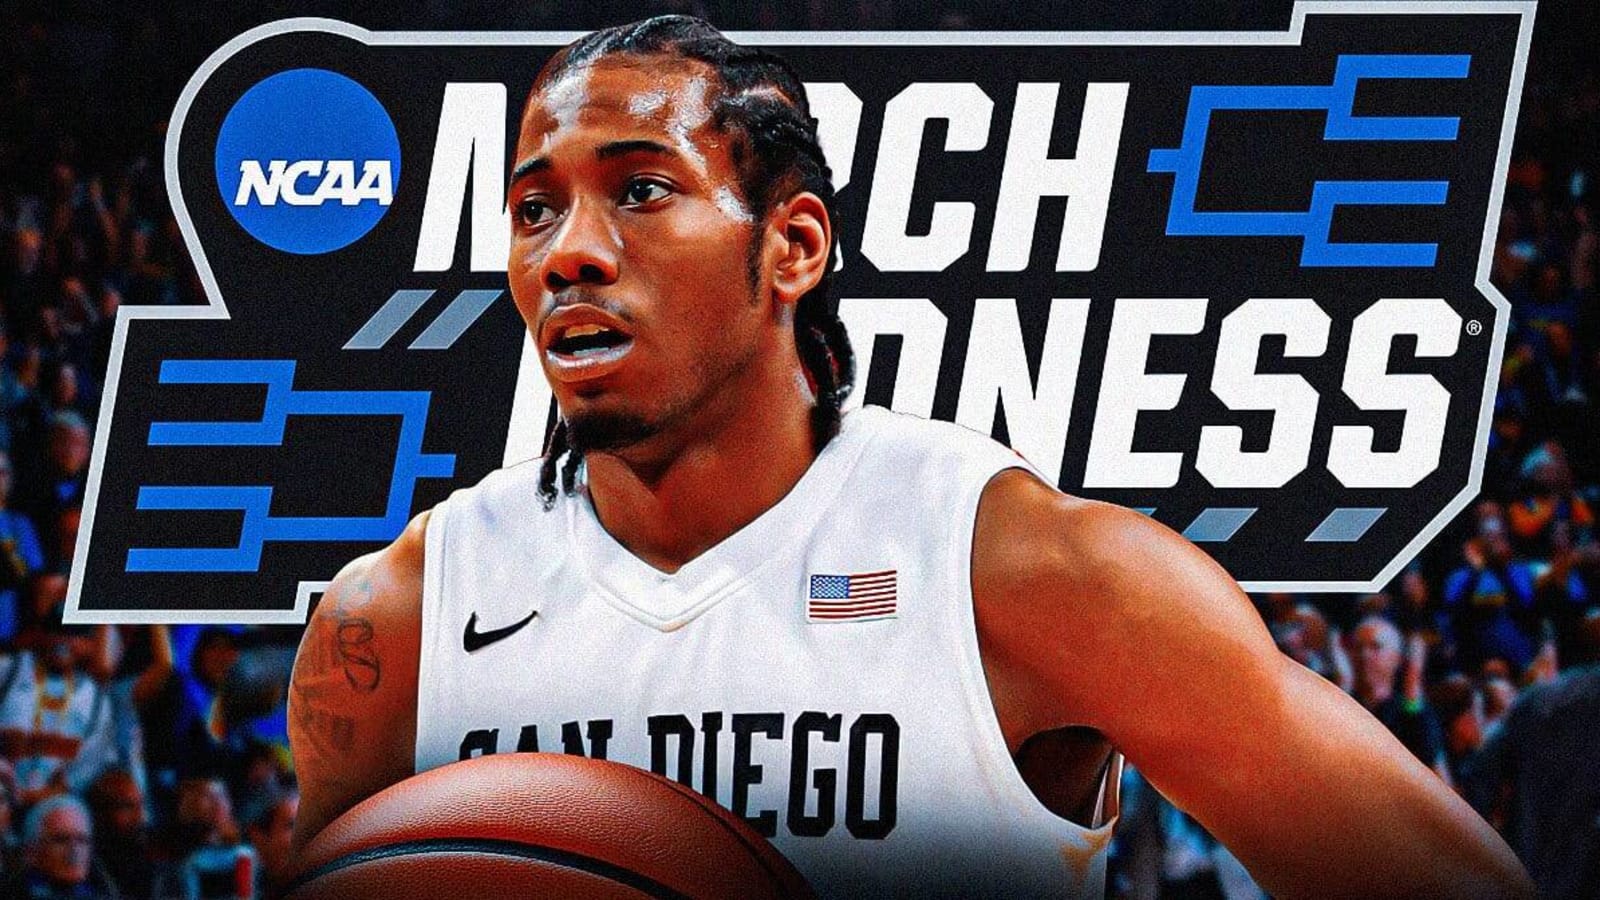 Kawhi Leonard’s March Madness iconic moments, history at San Diego State